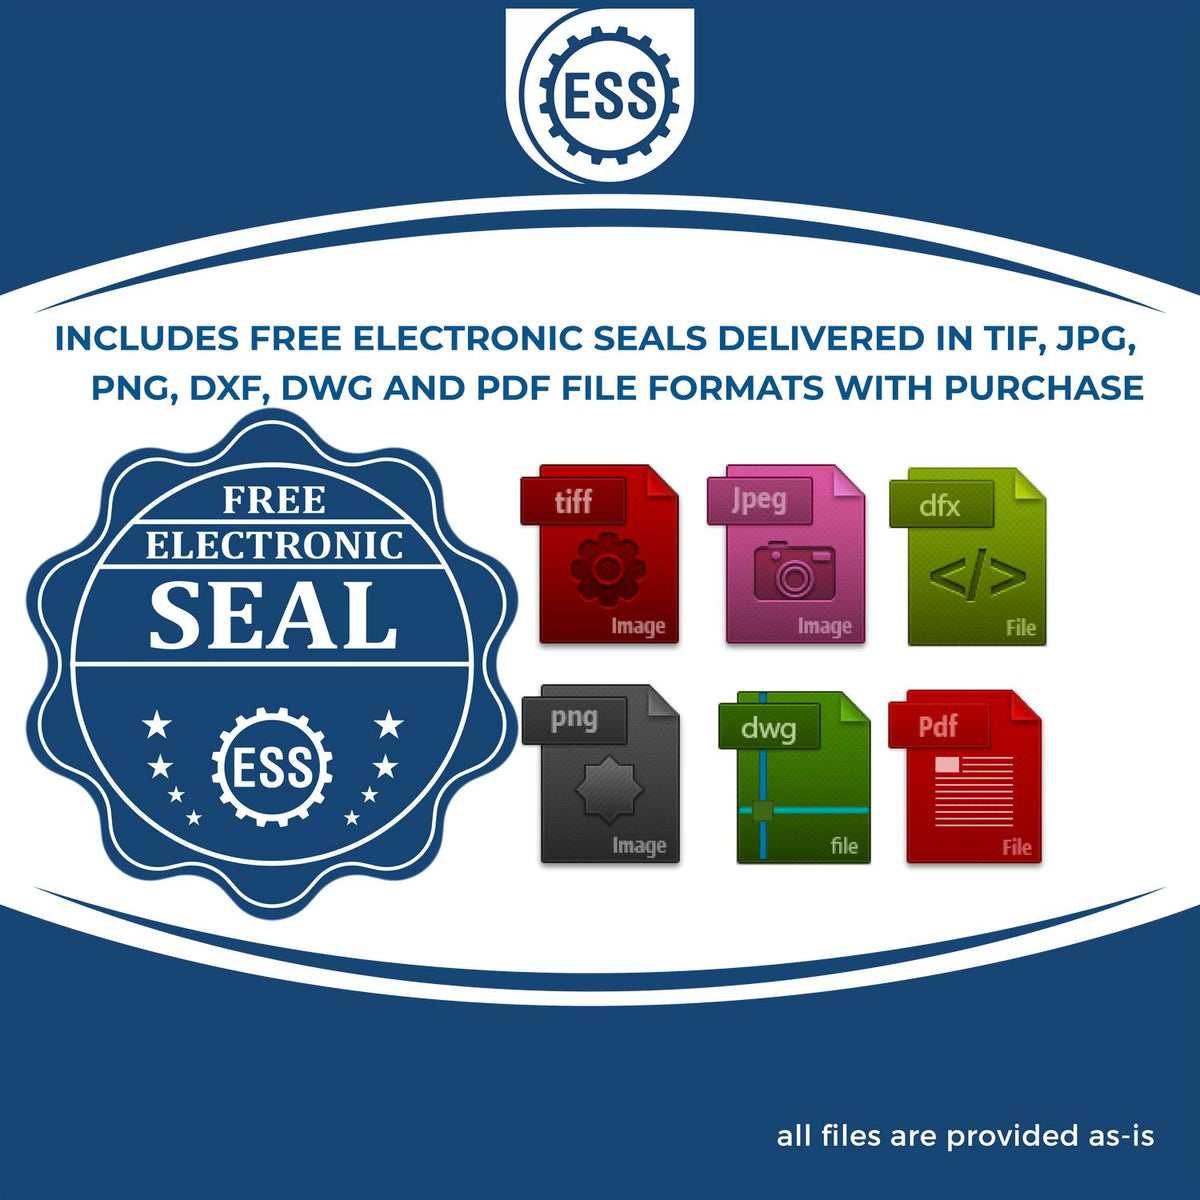 An infographic for the free electronic seal for the Slim Pre-Inked Wyoming Professional Geologist Seal Stamp illustrating the different file type icons such as DXF, DWG, TIF, JPG and PNG.